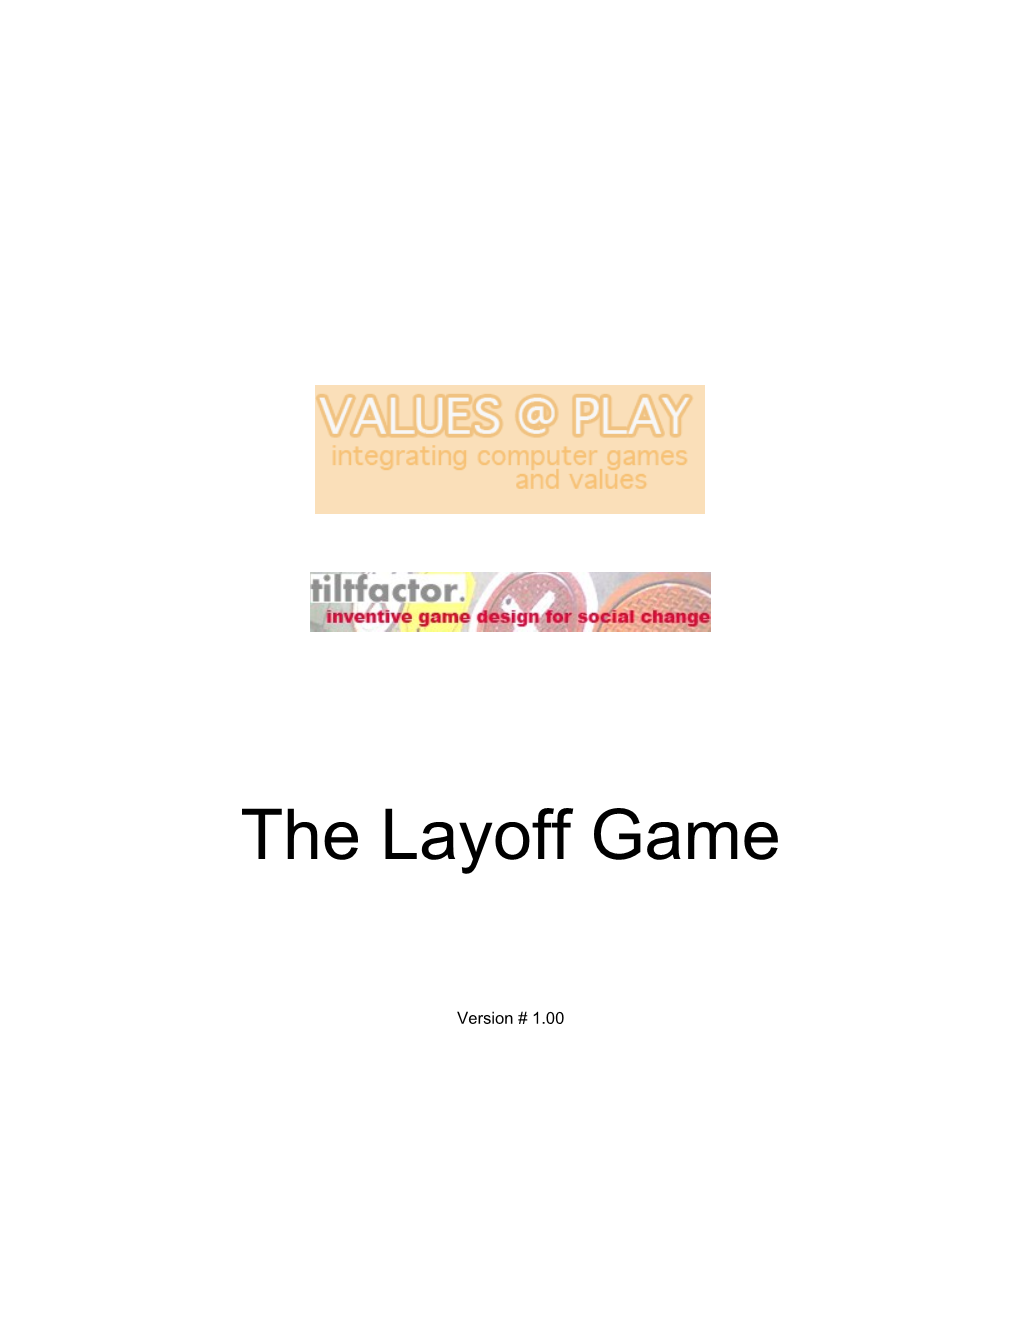 The Layoff Game